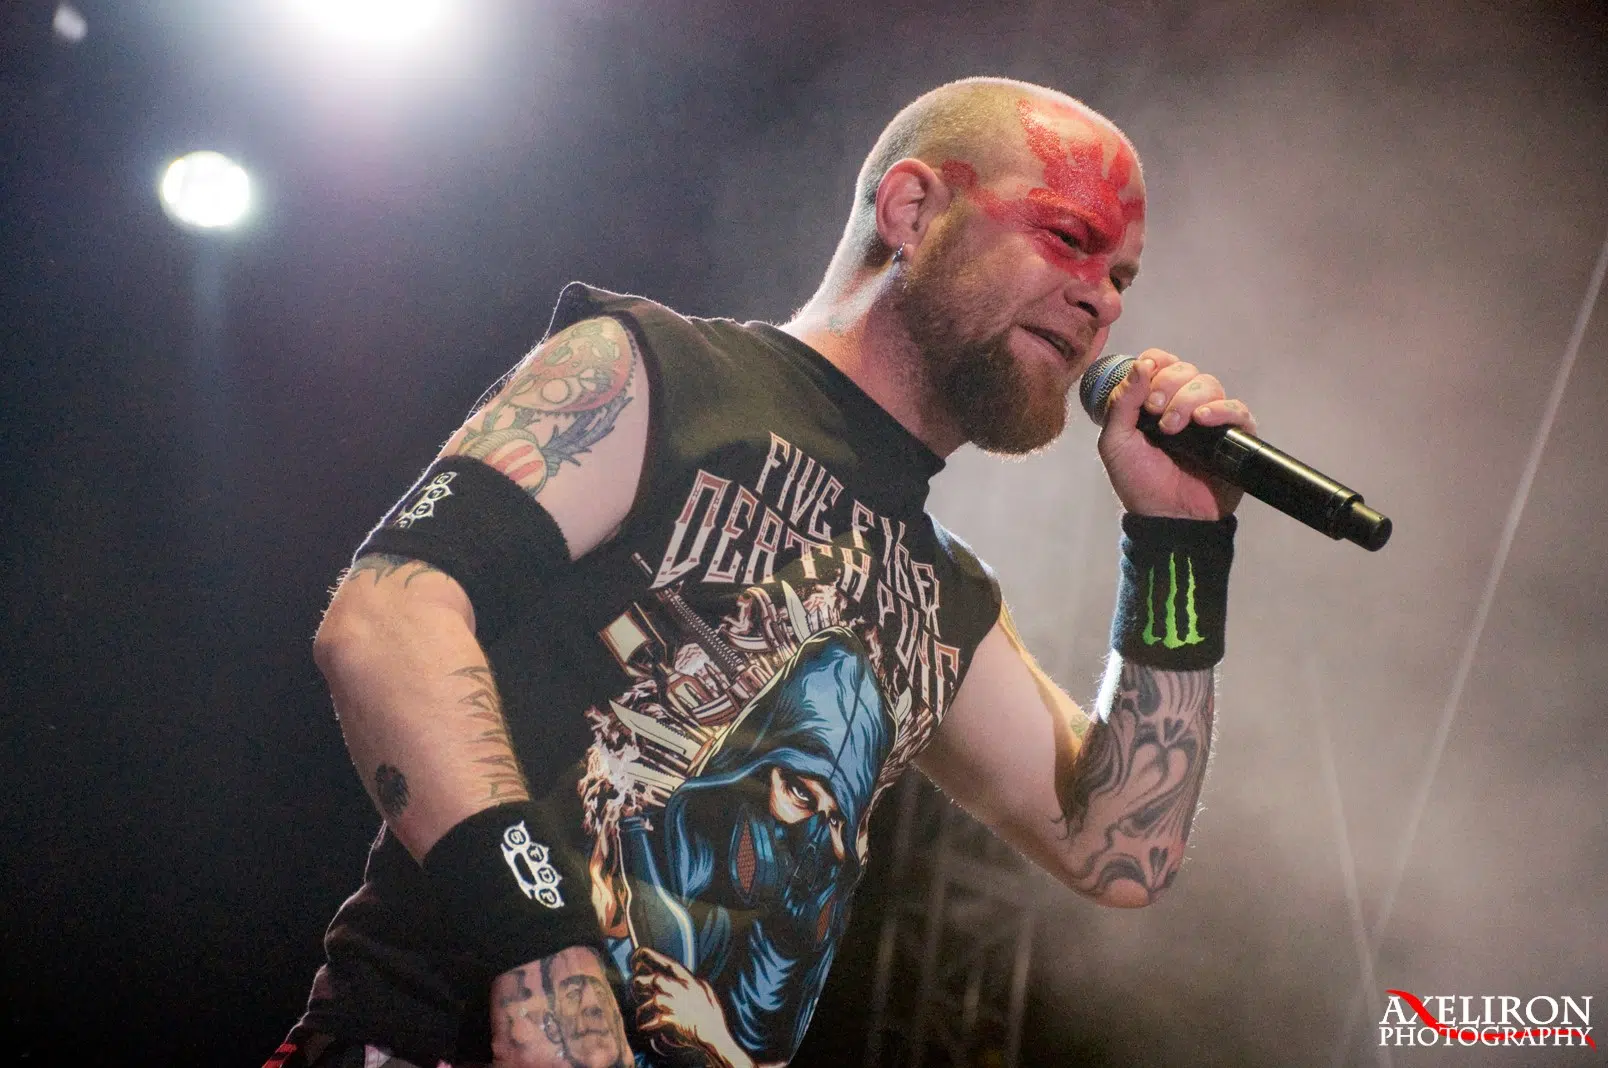 five finger death punch youtube music videos